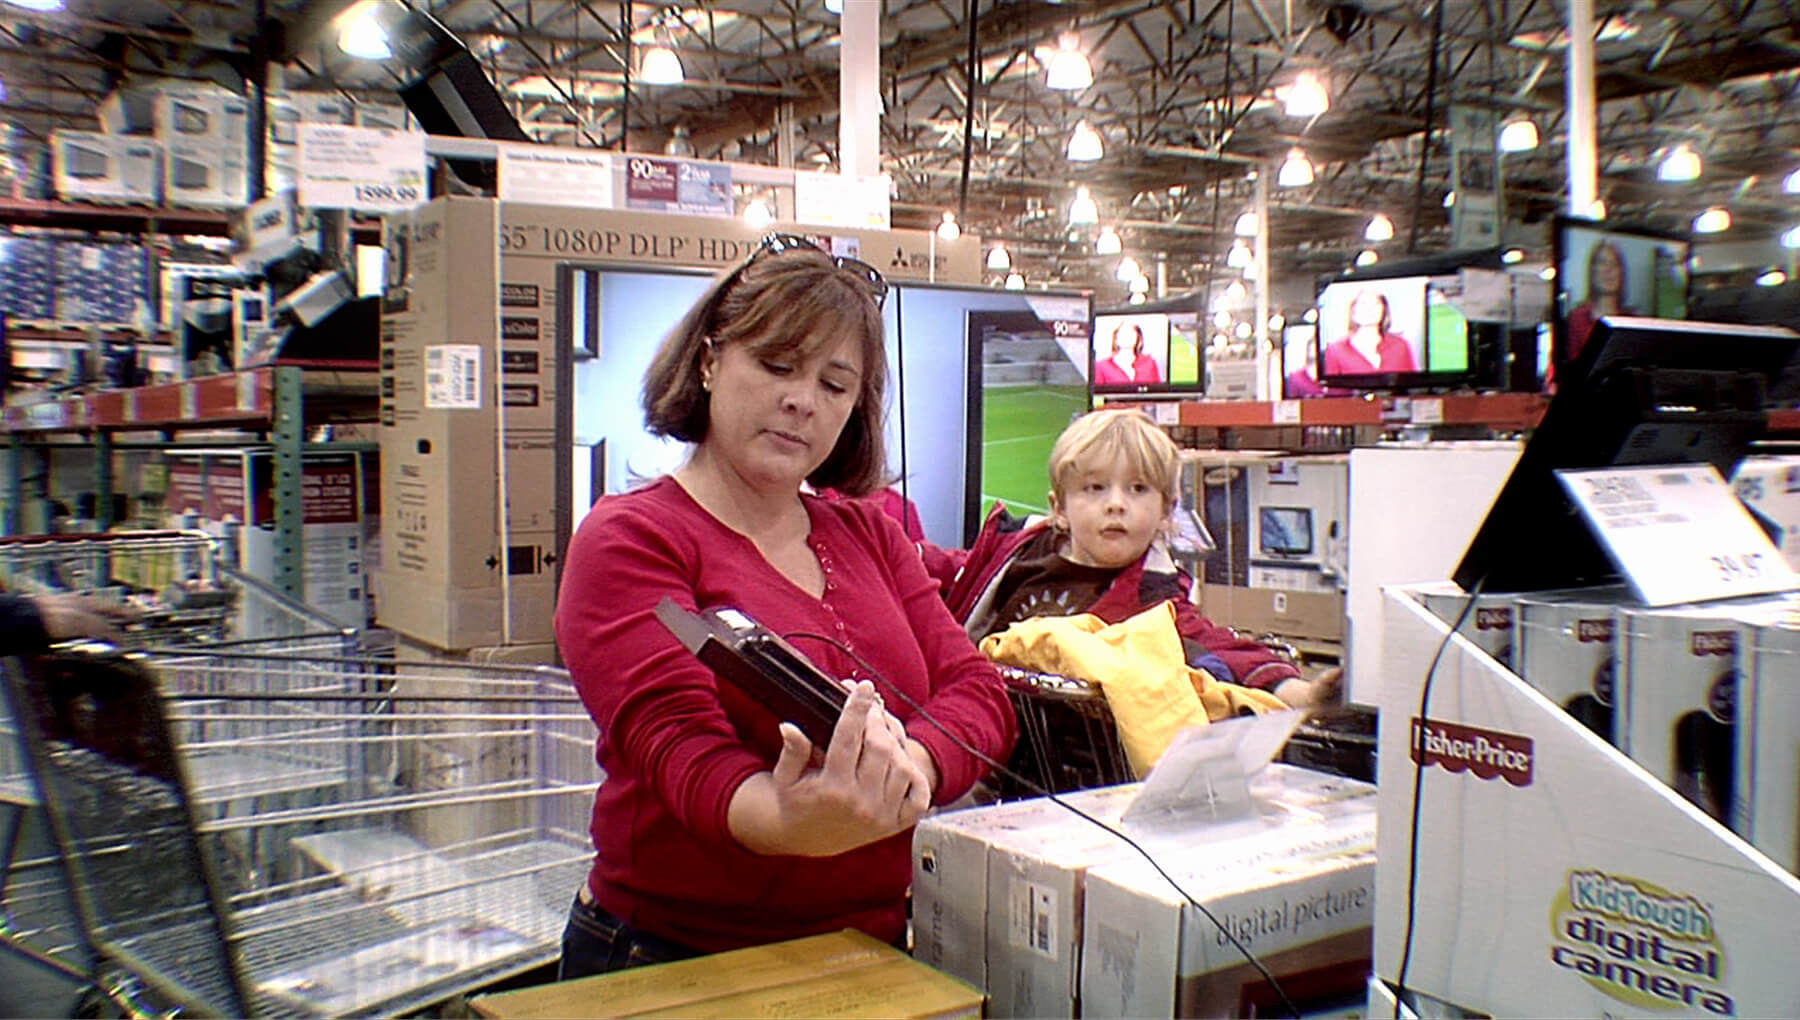 Still from Xmas Without China. A woman stands in an electronics store, holding an electronic with a long cord in one hand. She wears a red top, sunglasses on top of her head, and has short dark hair. A young child sits in a cart behind her. He wears a coat and has blonde hair.